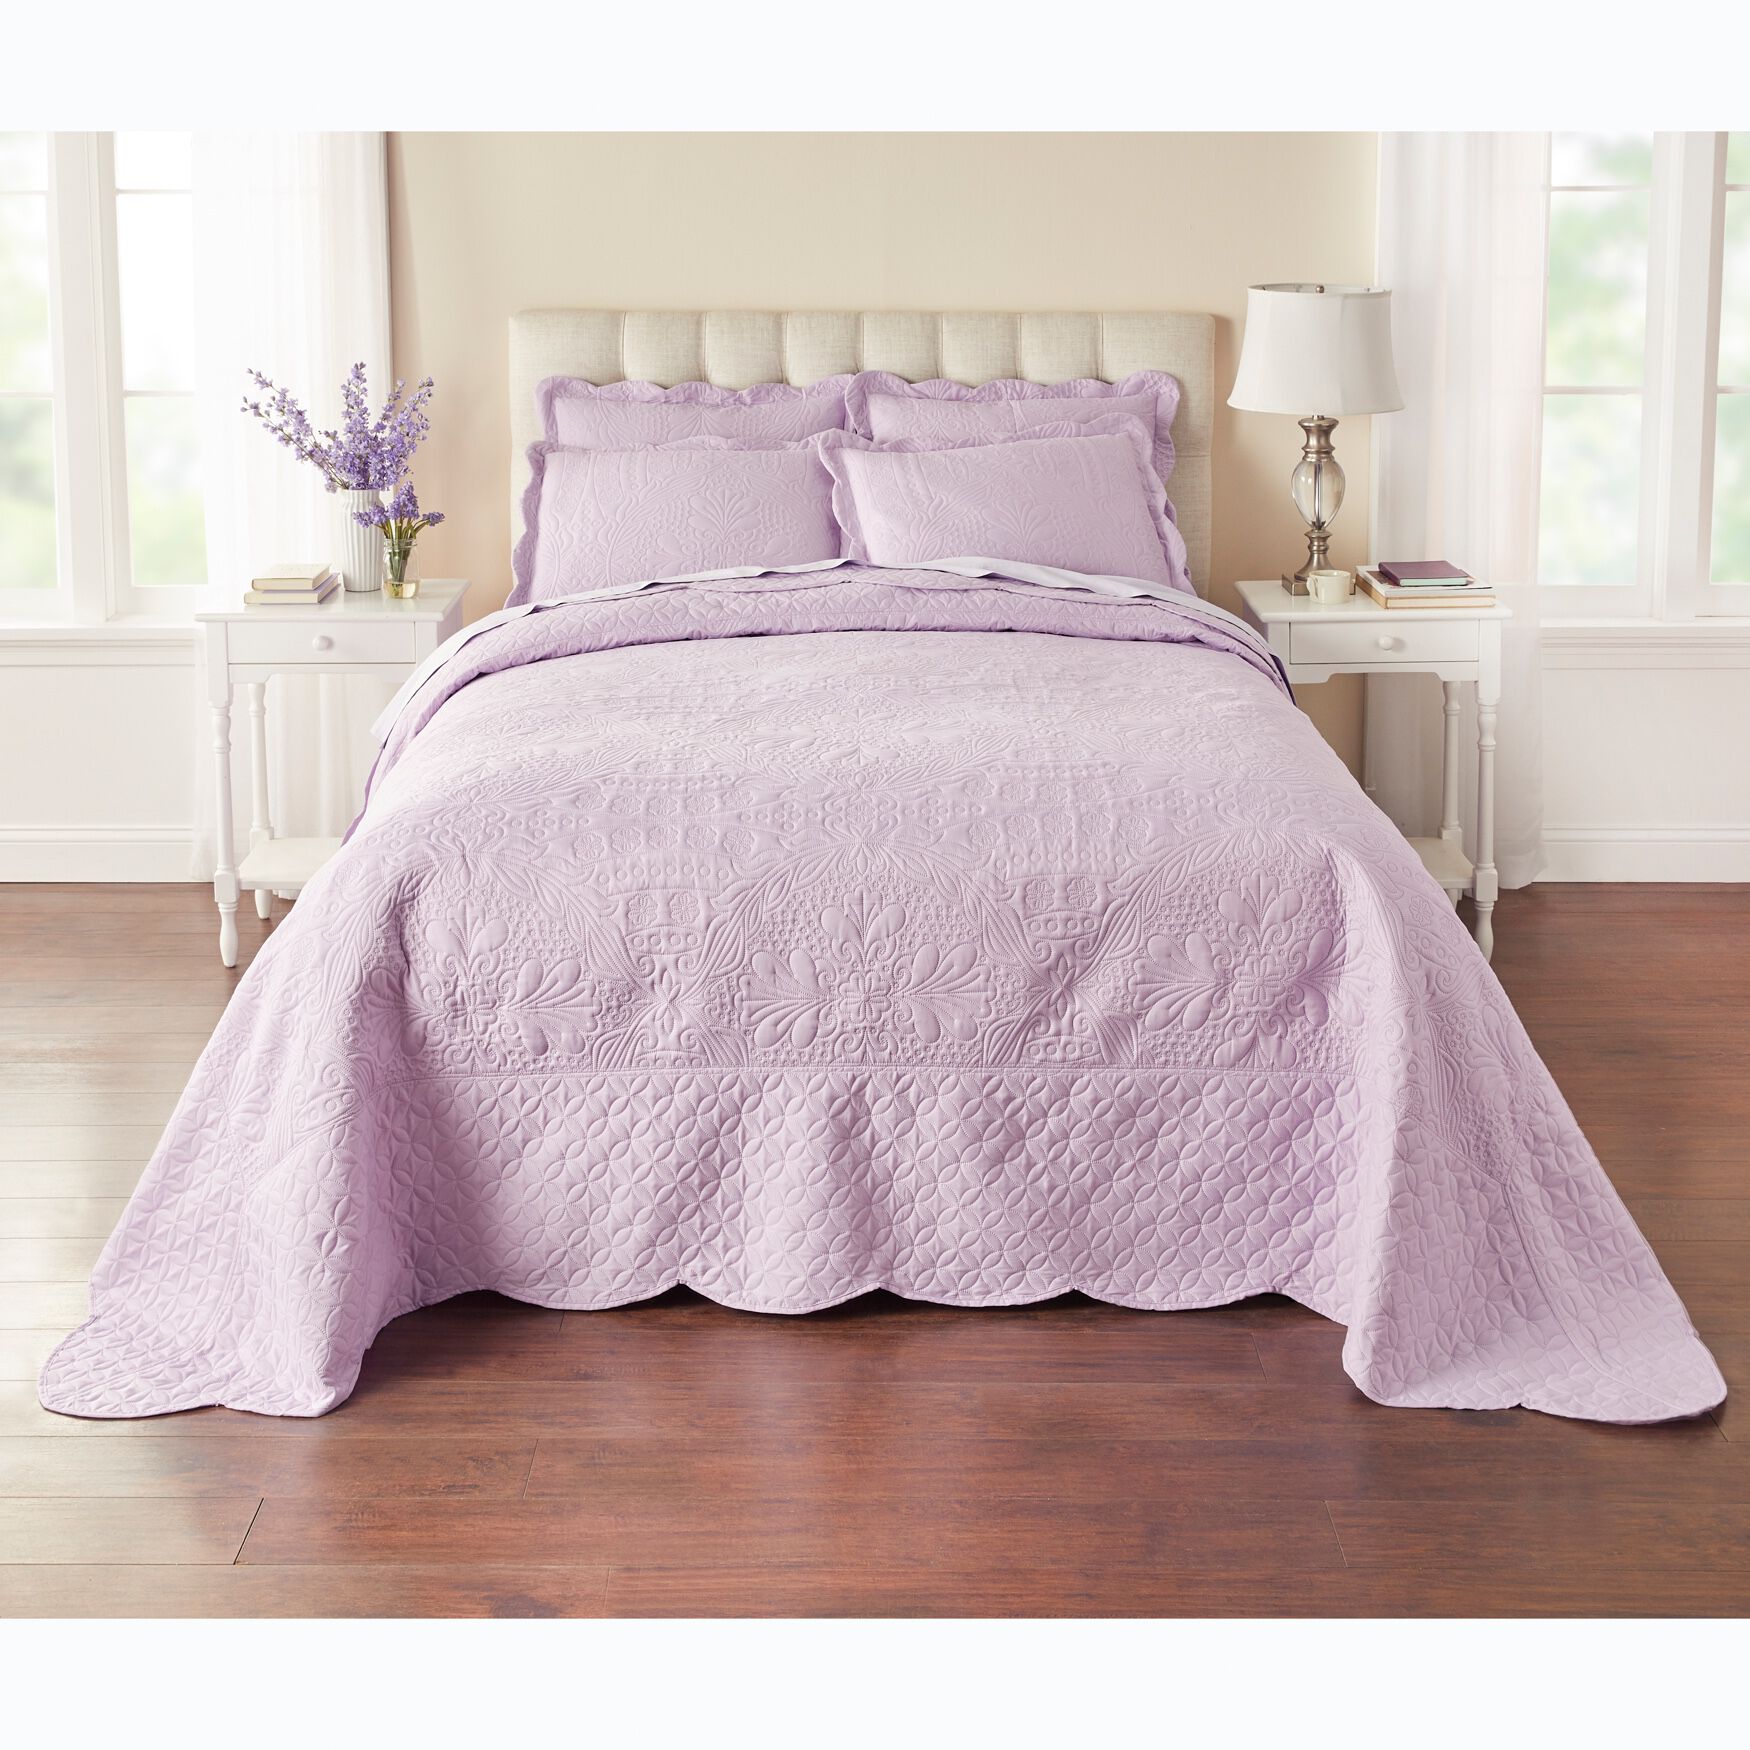 Bedding Collections, Bed Sets, Sheets & More | Brylane Home